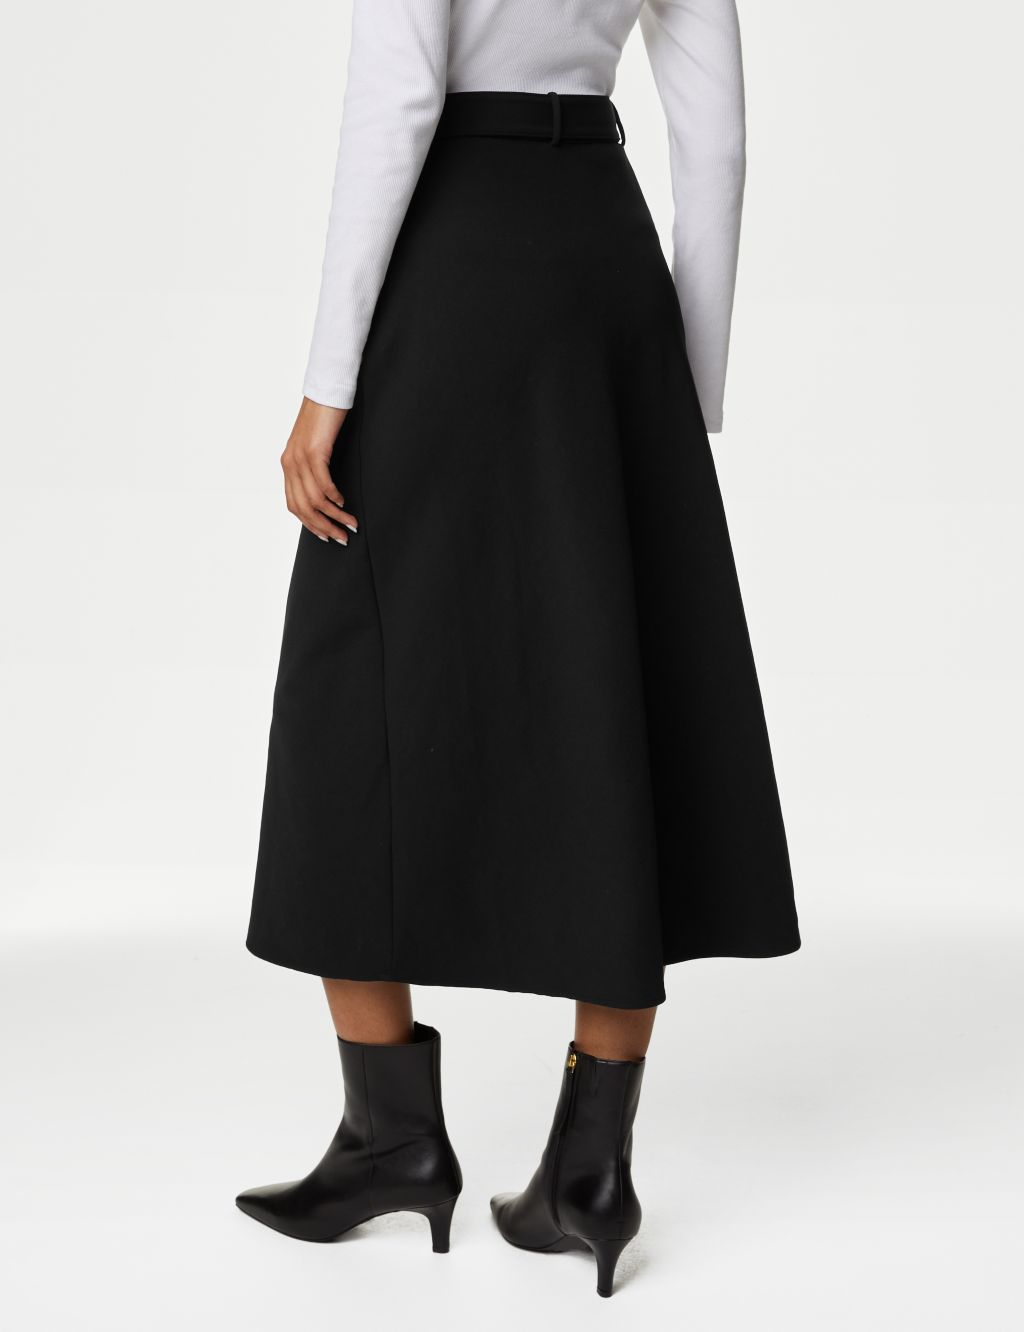 Belted Midaxi A-Line Skirt image 5